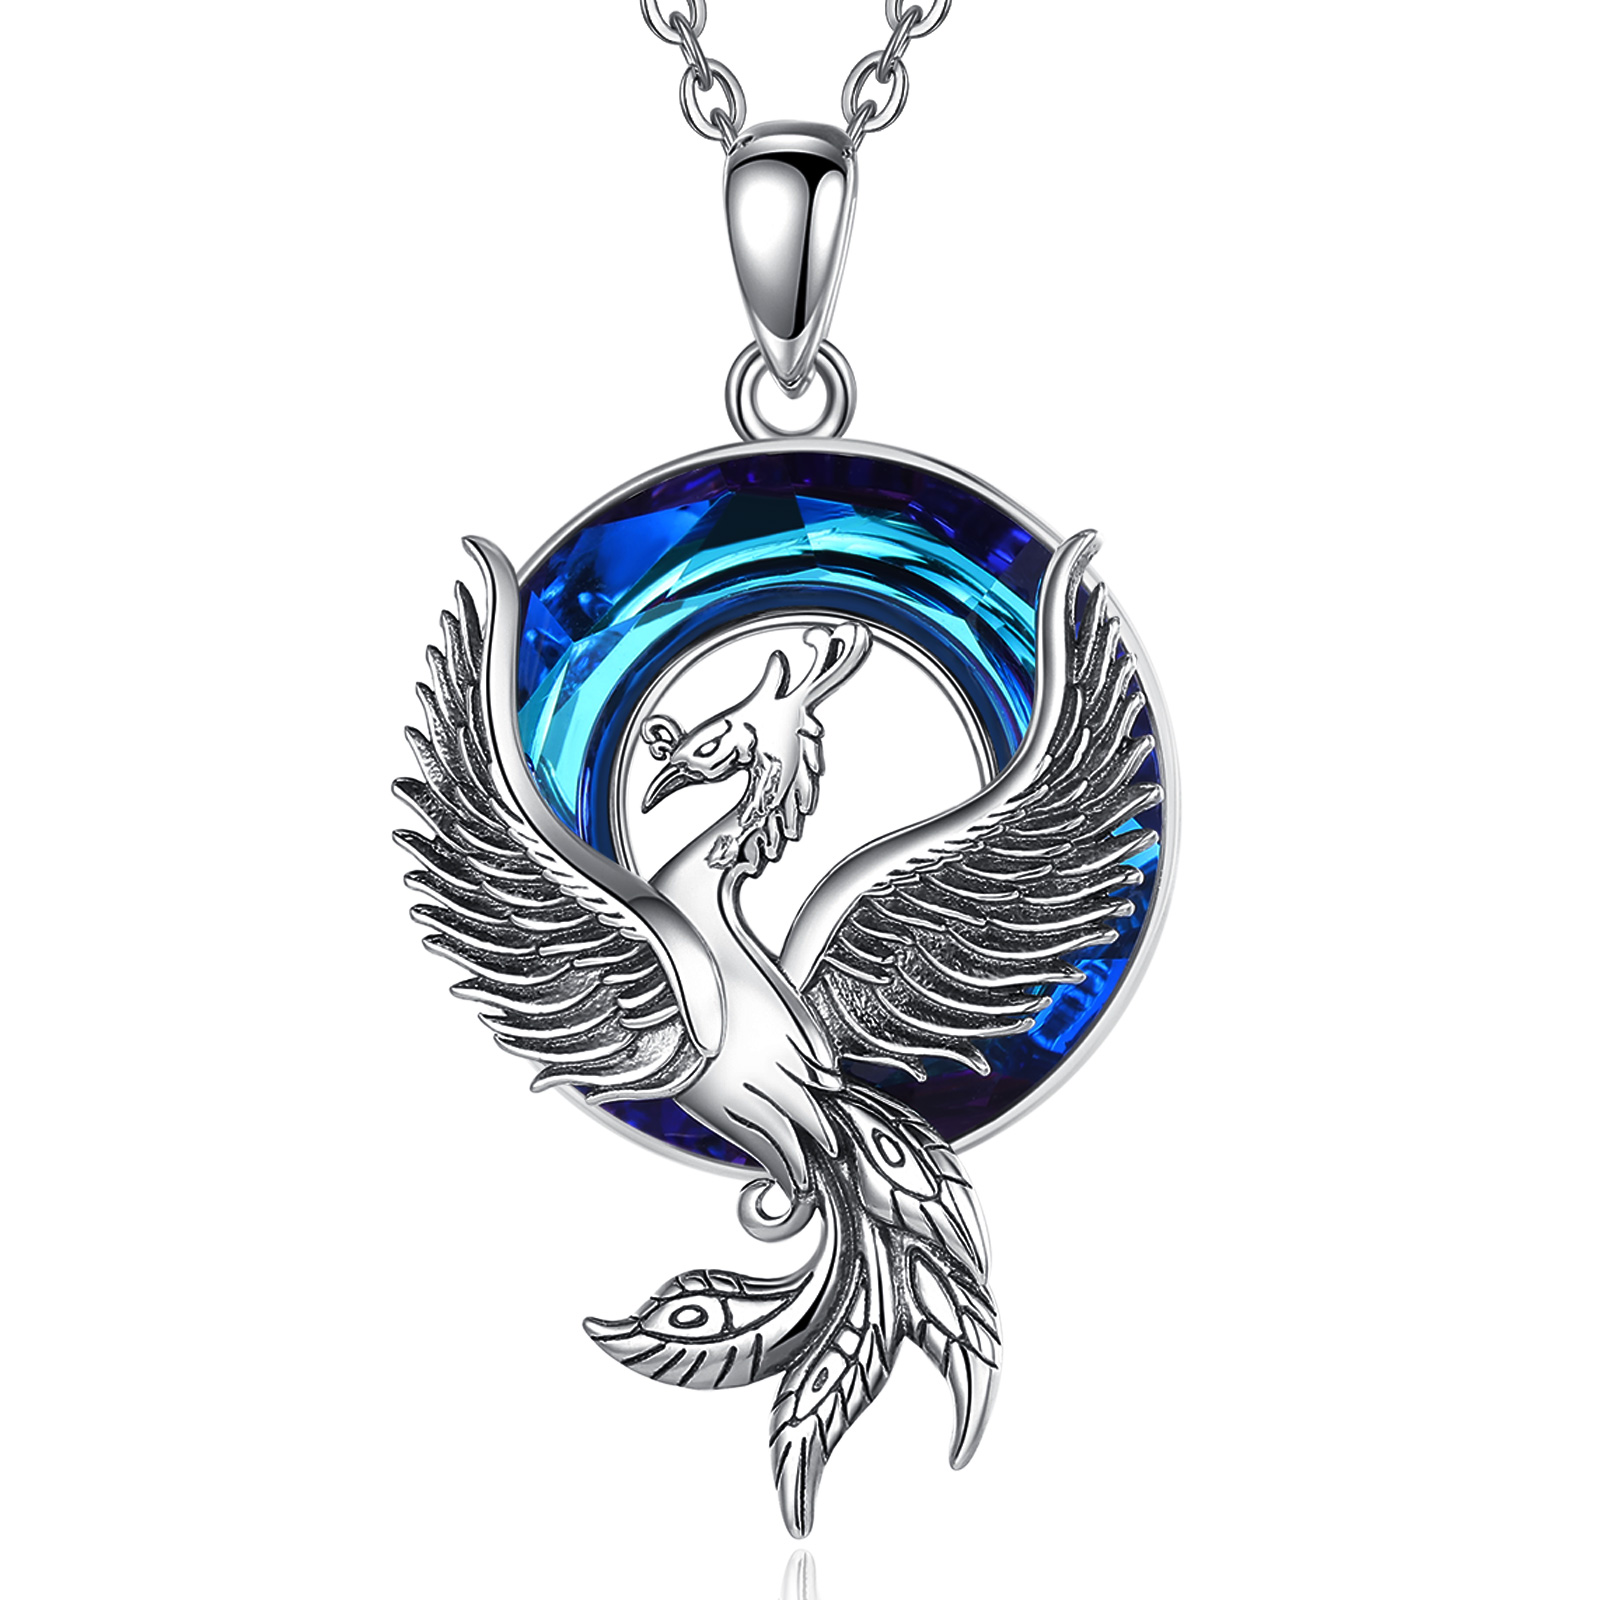 Merryshine Jewelry 925 Sterling Silver Material Phoenix Design Crystal Pendant Necklace for Men